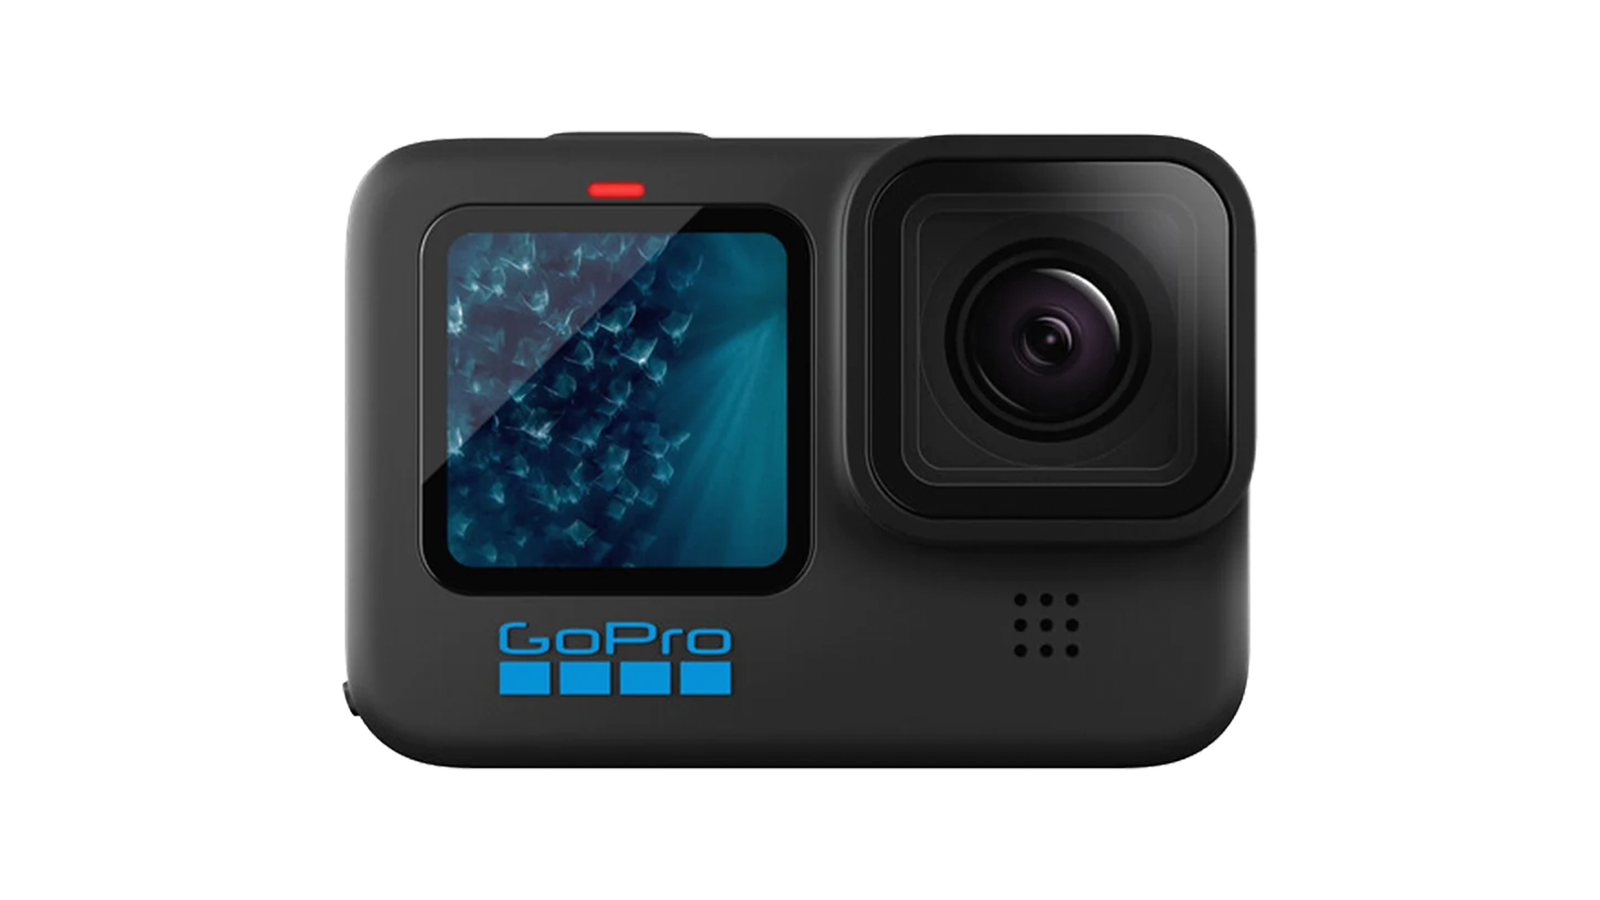 GoPro Hero11 Black - The best action camera for YouTubers